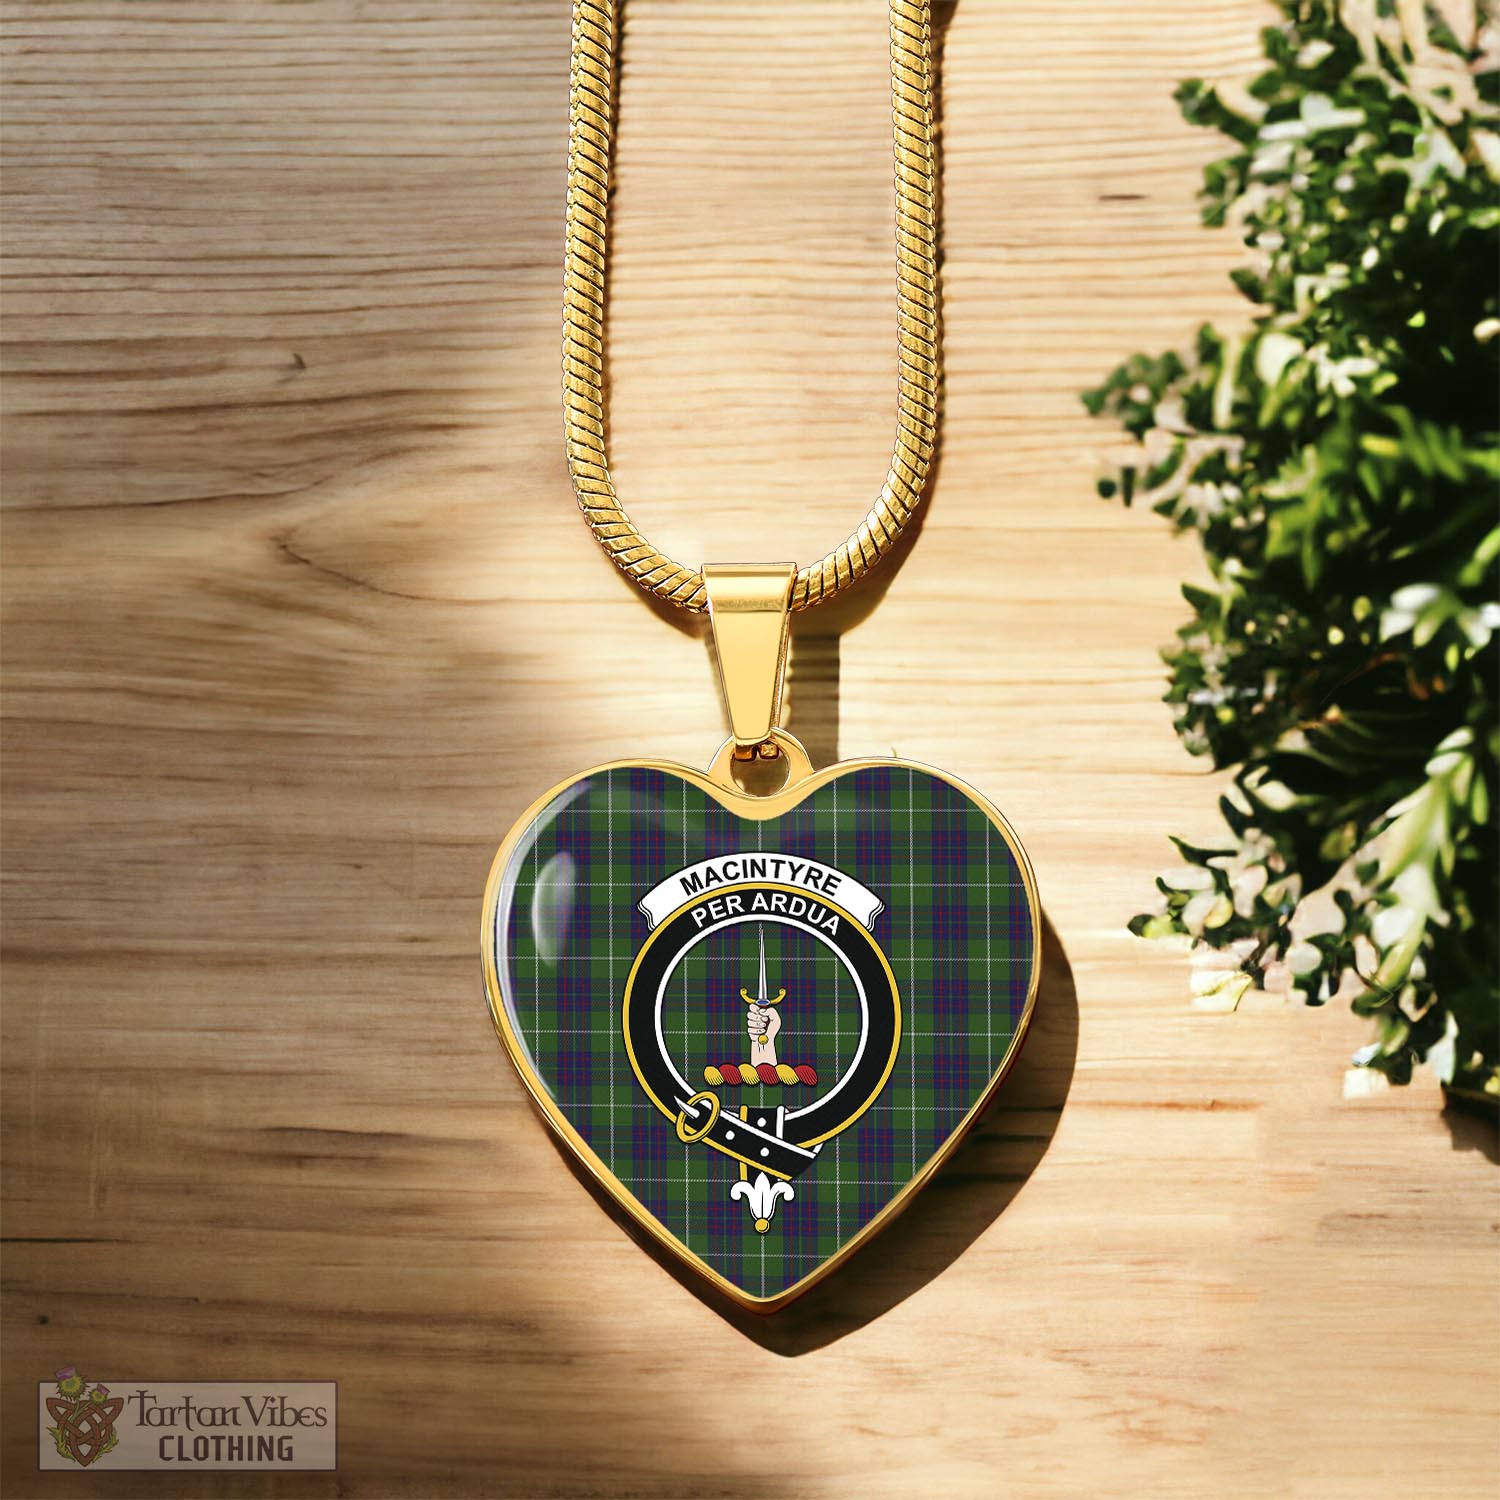 Tartan Vibes Clothing MacIntyre Hunting Tartan Heart Necklace with Family Crest